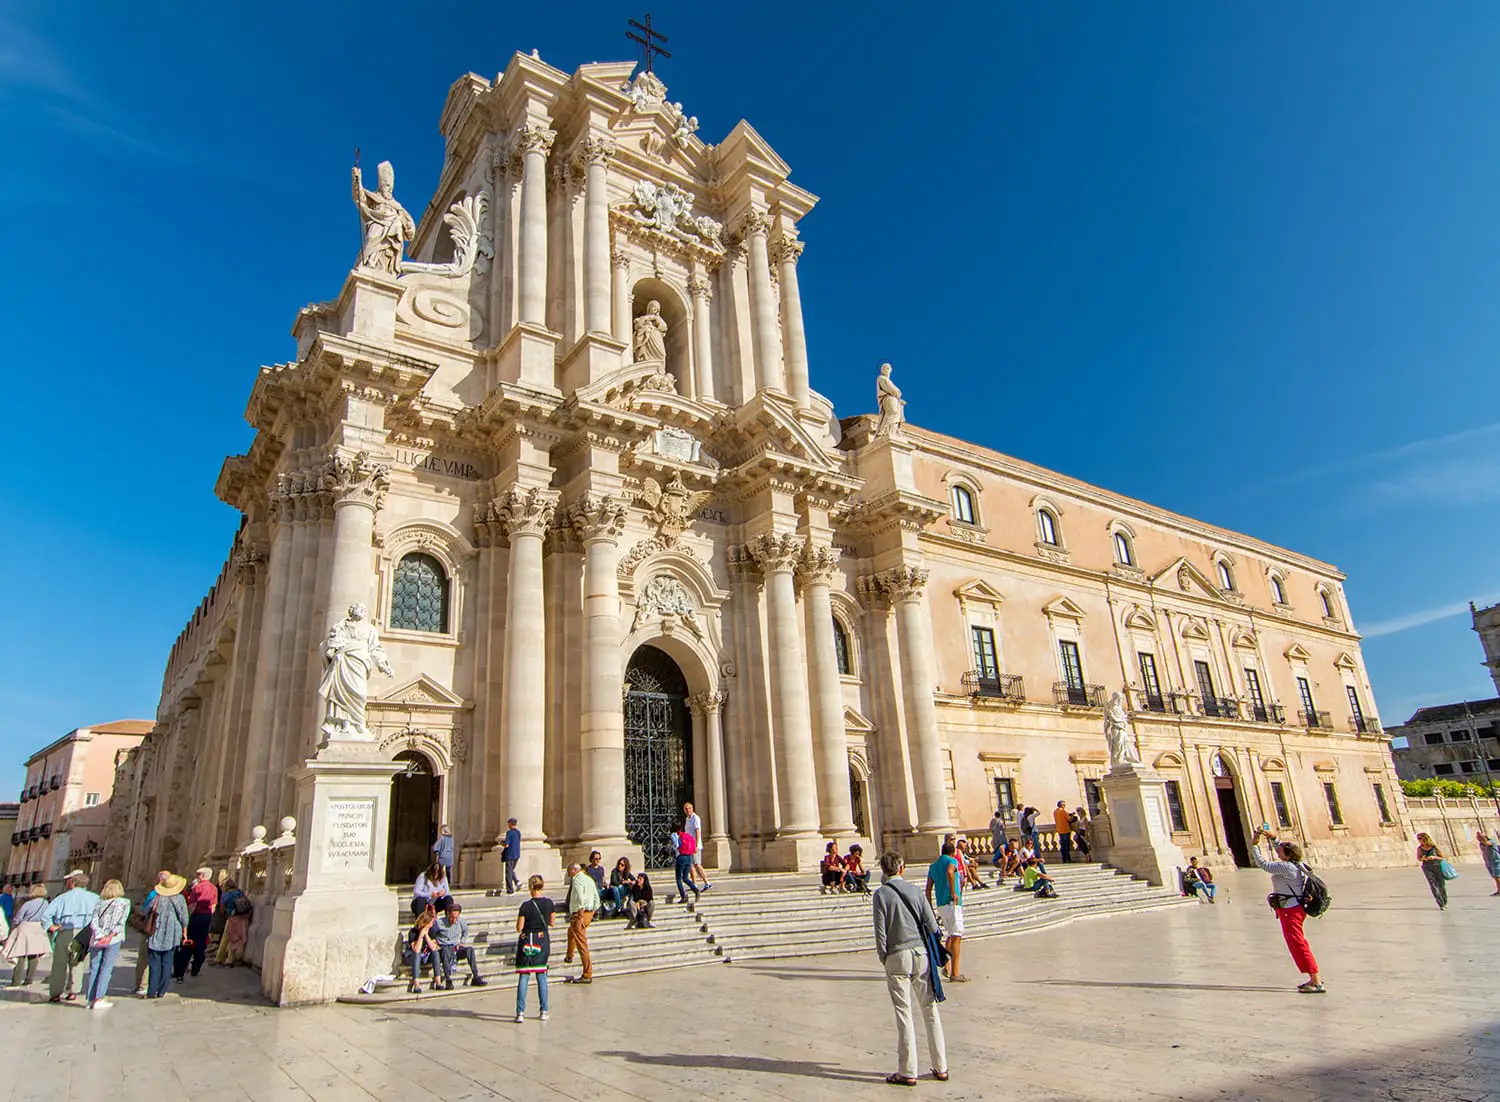 Tourists visiting Duomo Square in Ortigia, the historical city centre of Syracuse, Italy